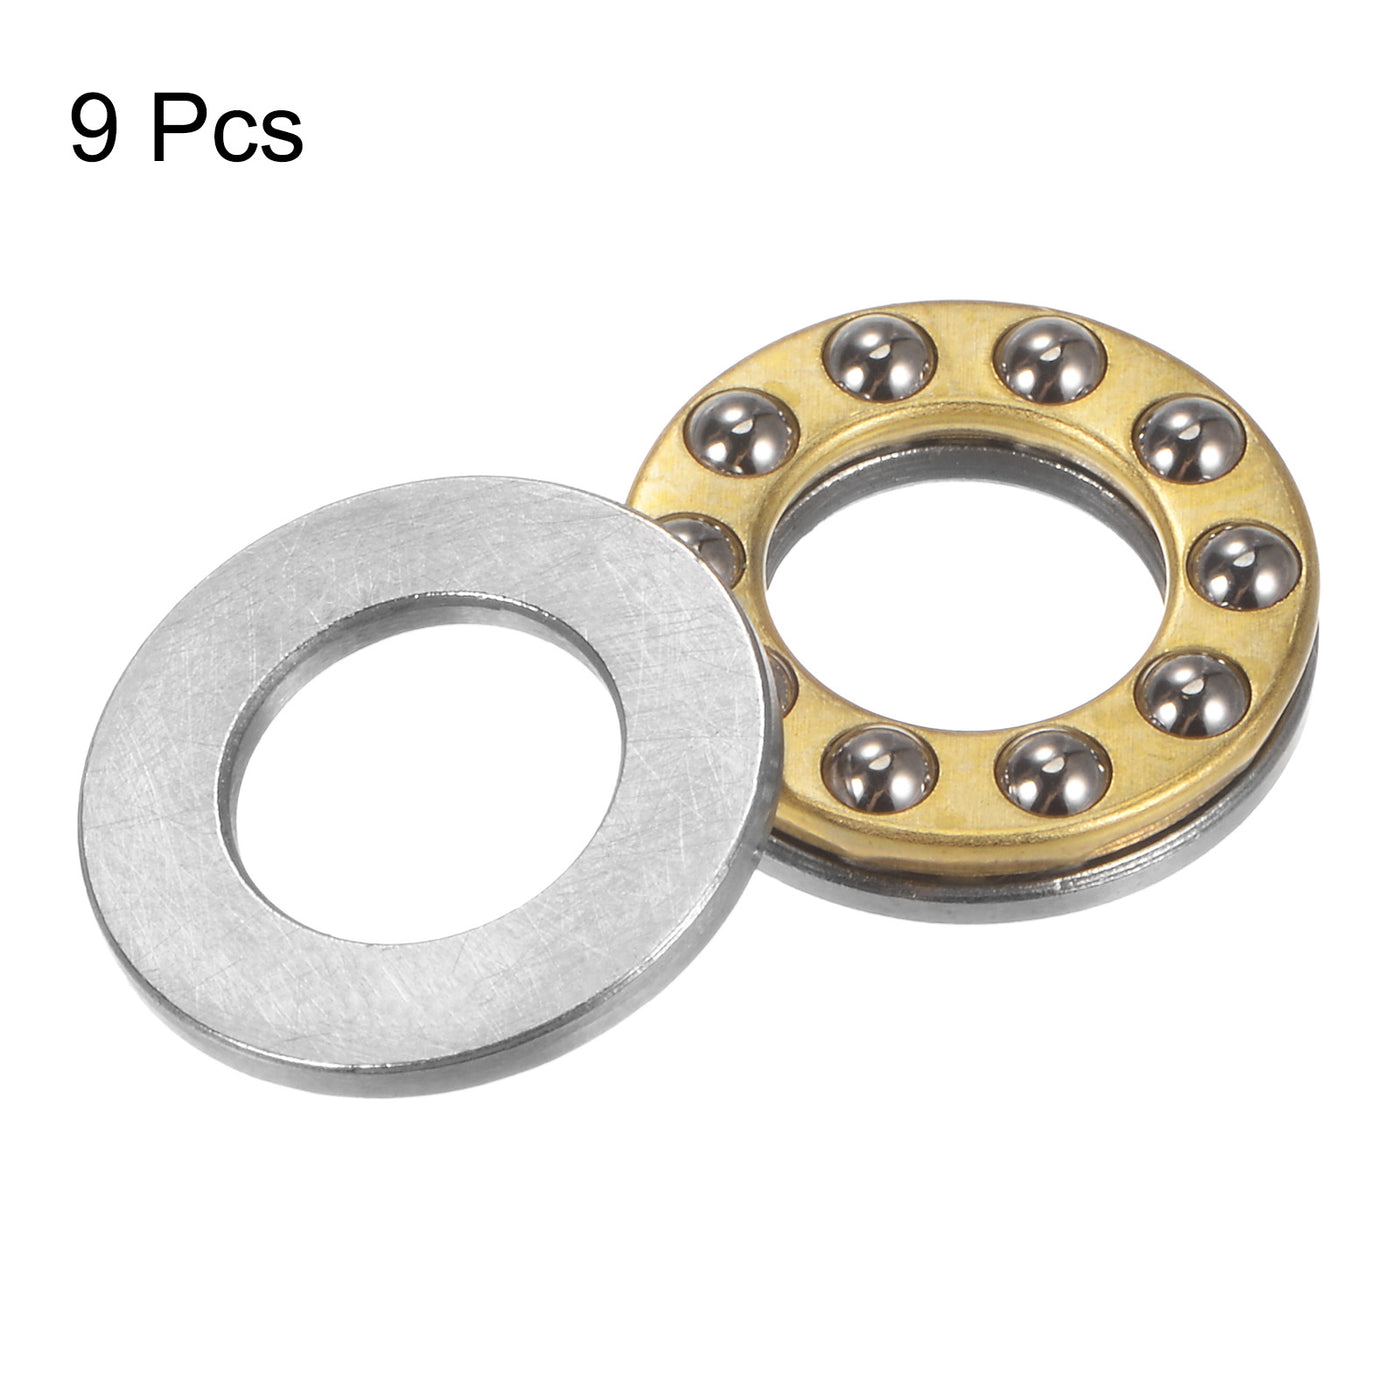 uxcell Uxcell F10-18M Thrust Ball Bearing 10x18x5.5mm Brass with Washers 9pcs